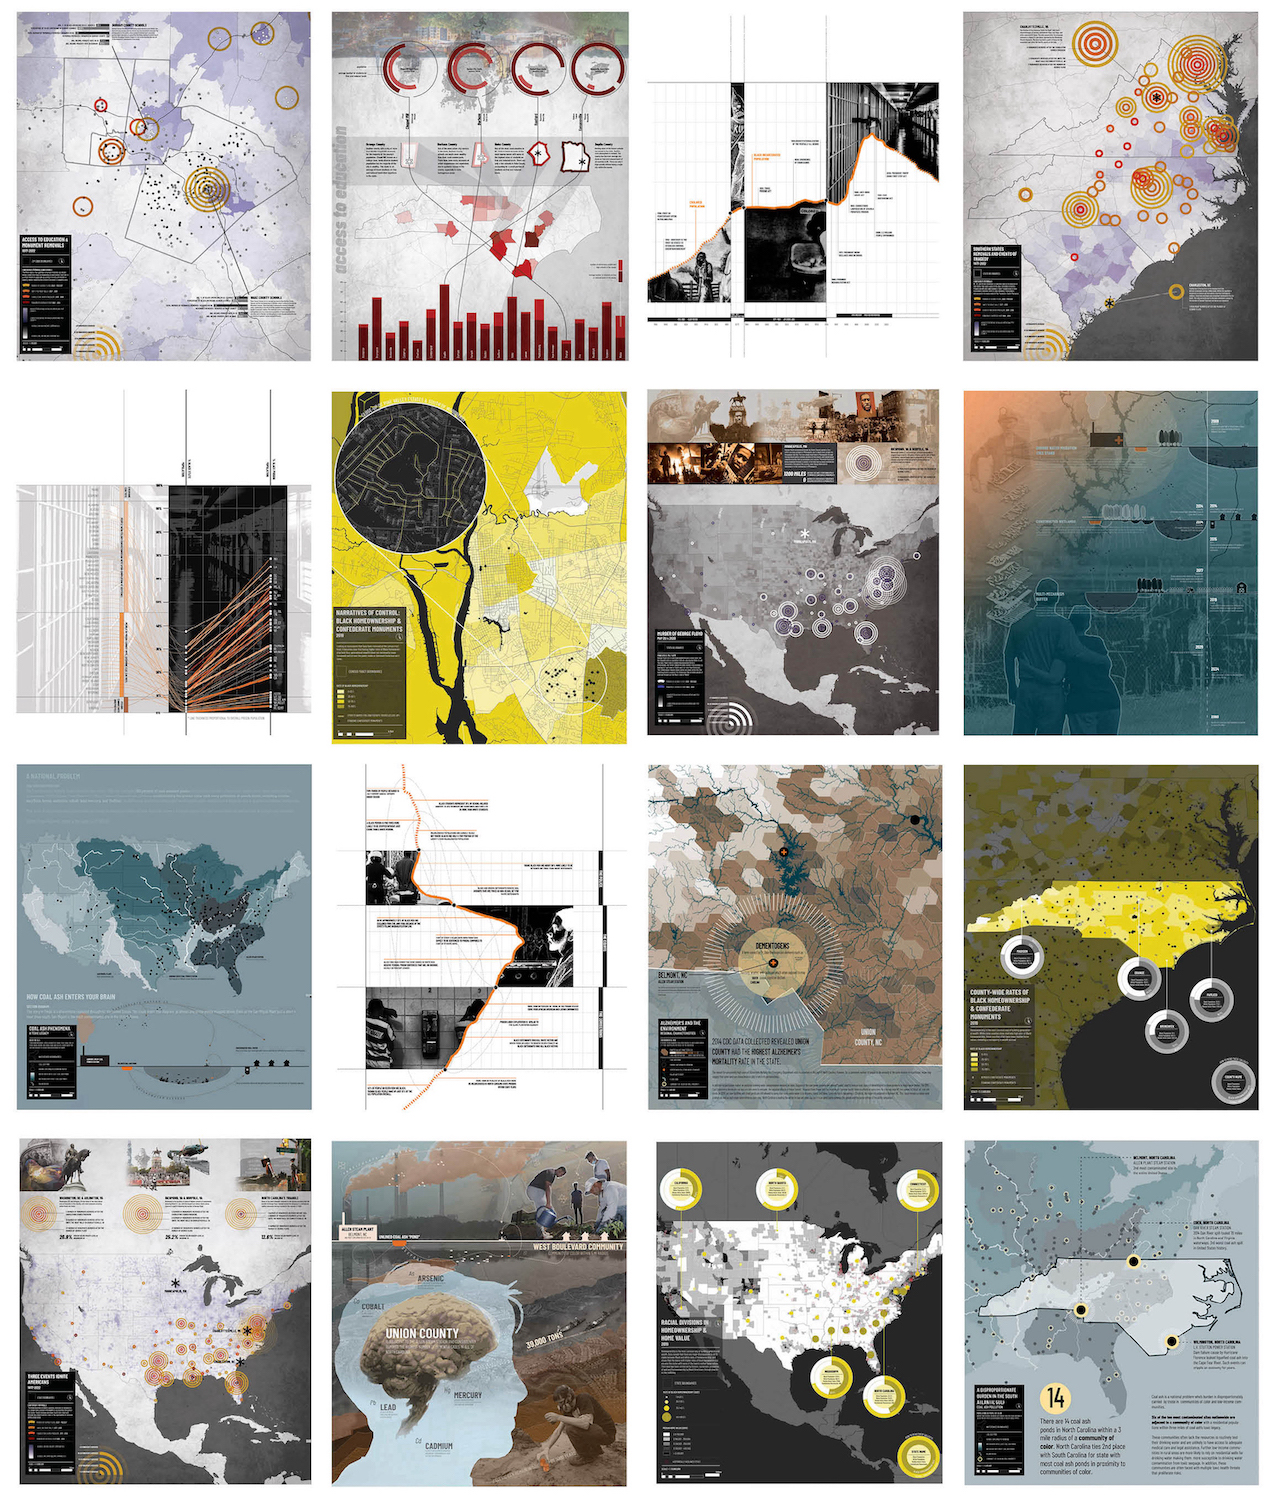 Grid of images of data visualizations